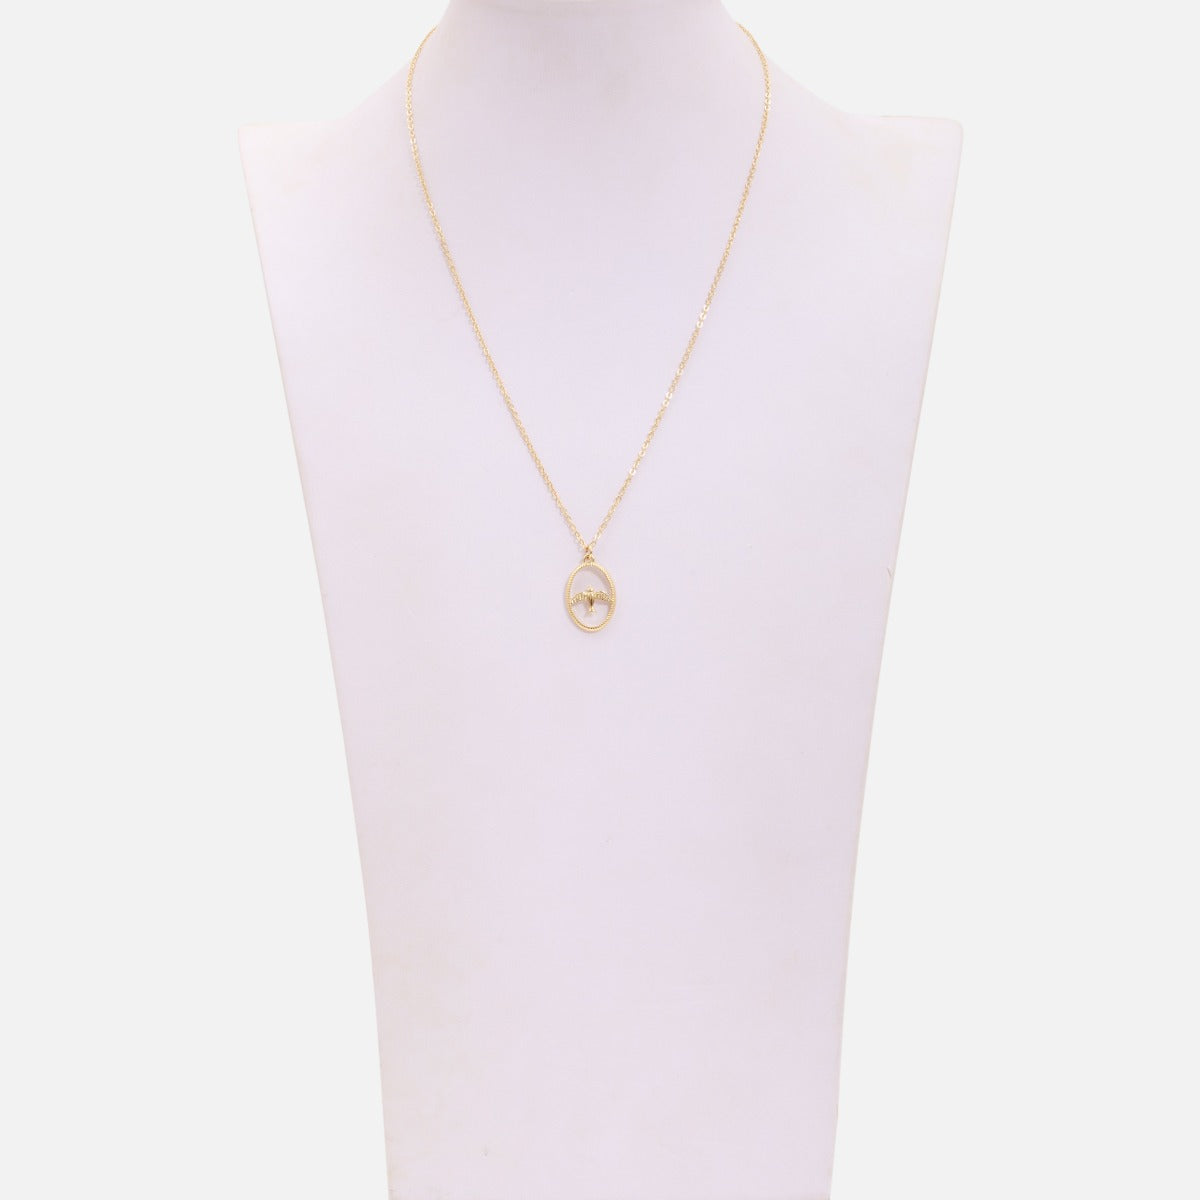 Golden necklace with oval bird charm 